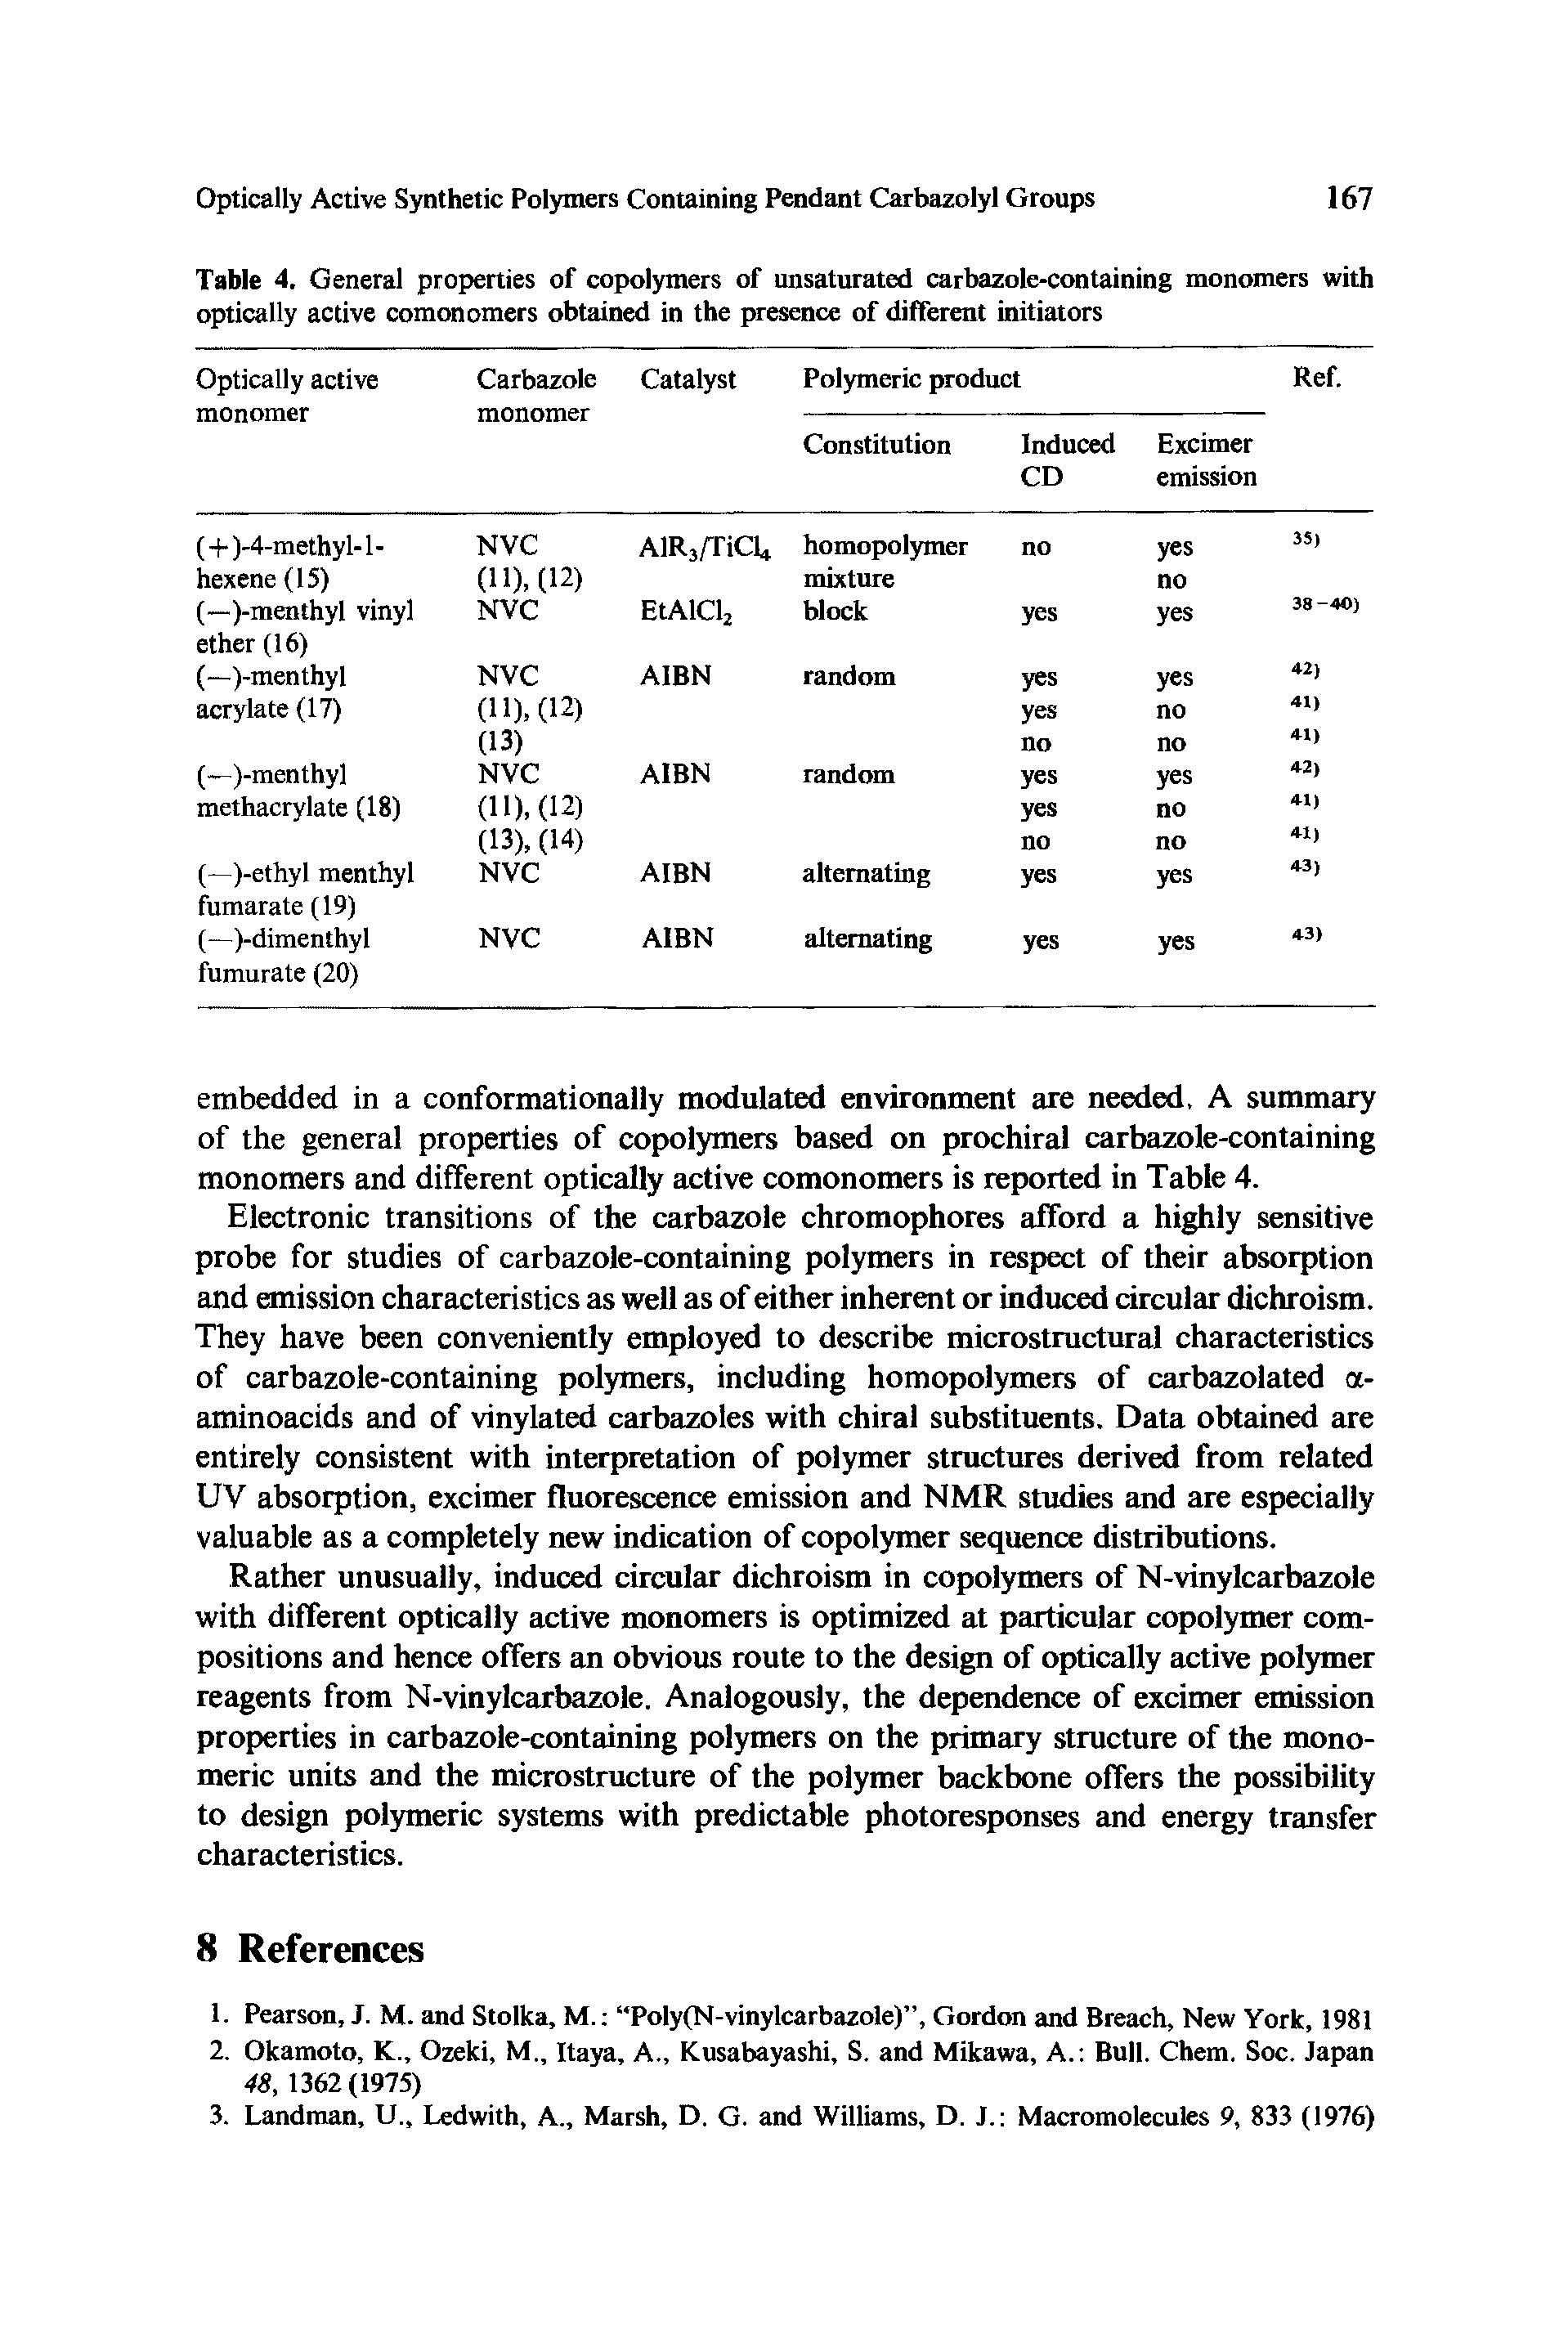 Table 4. General properties of copolymers of unsaturated carbazole-containing monomers with optically active comonomers obtained in the presence of different initiators...